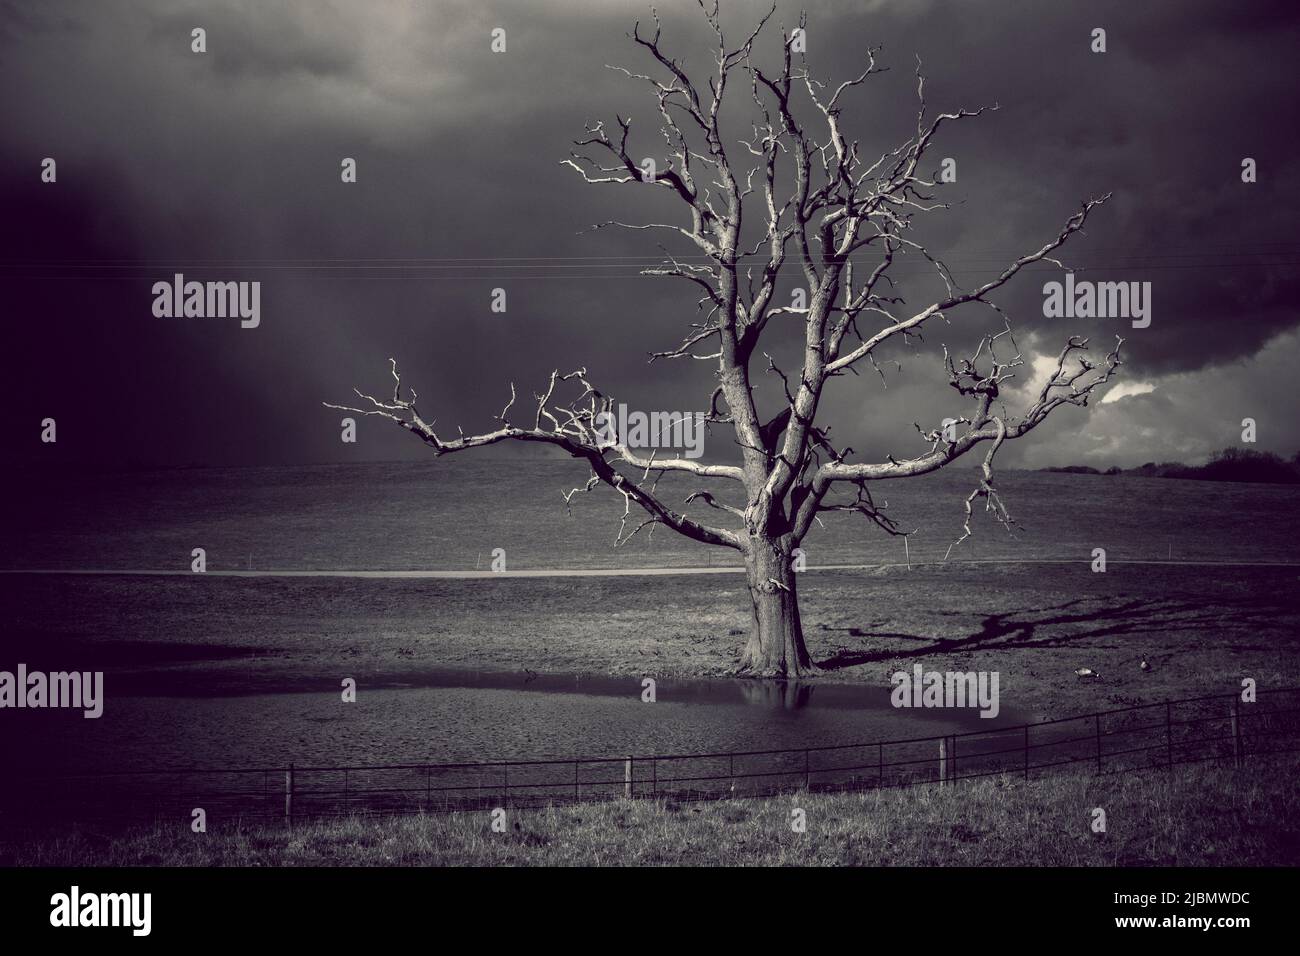 Dramatic black and white landscape of light hitting a bare tree after a storm Stock Photo